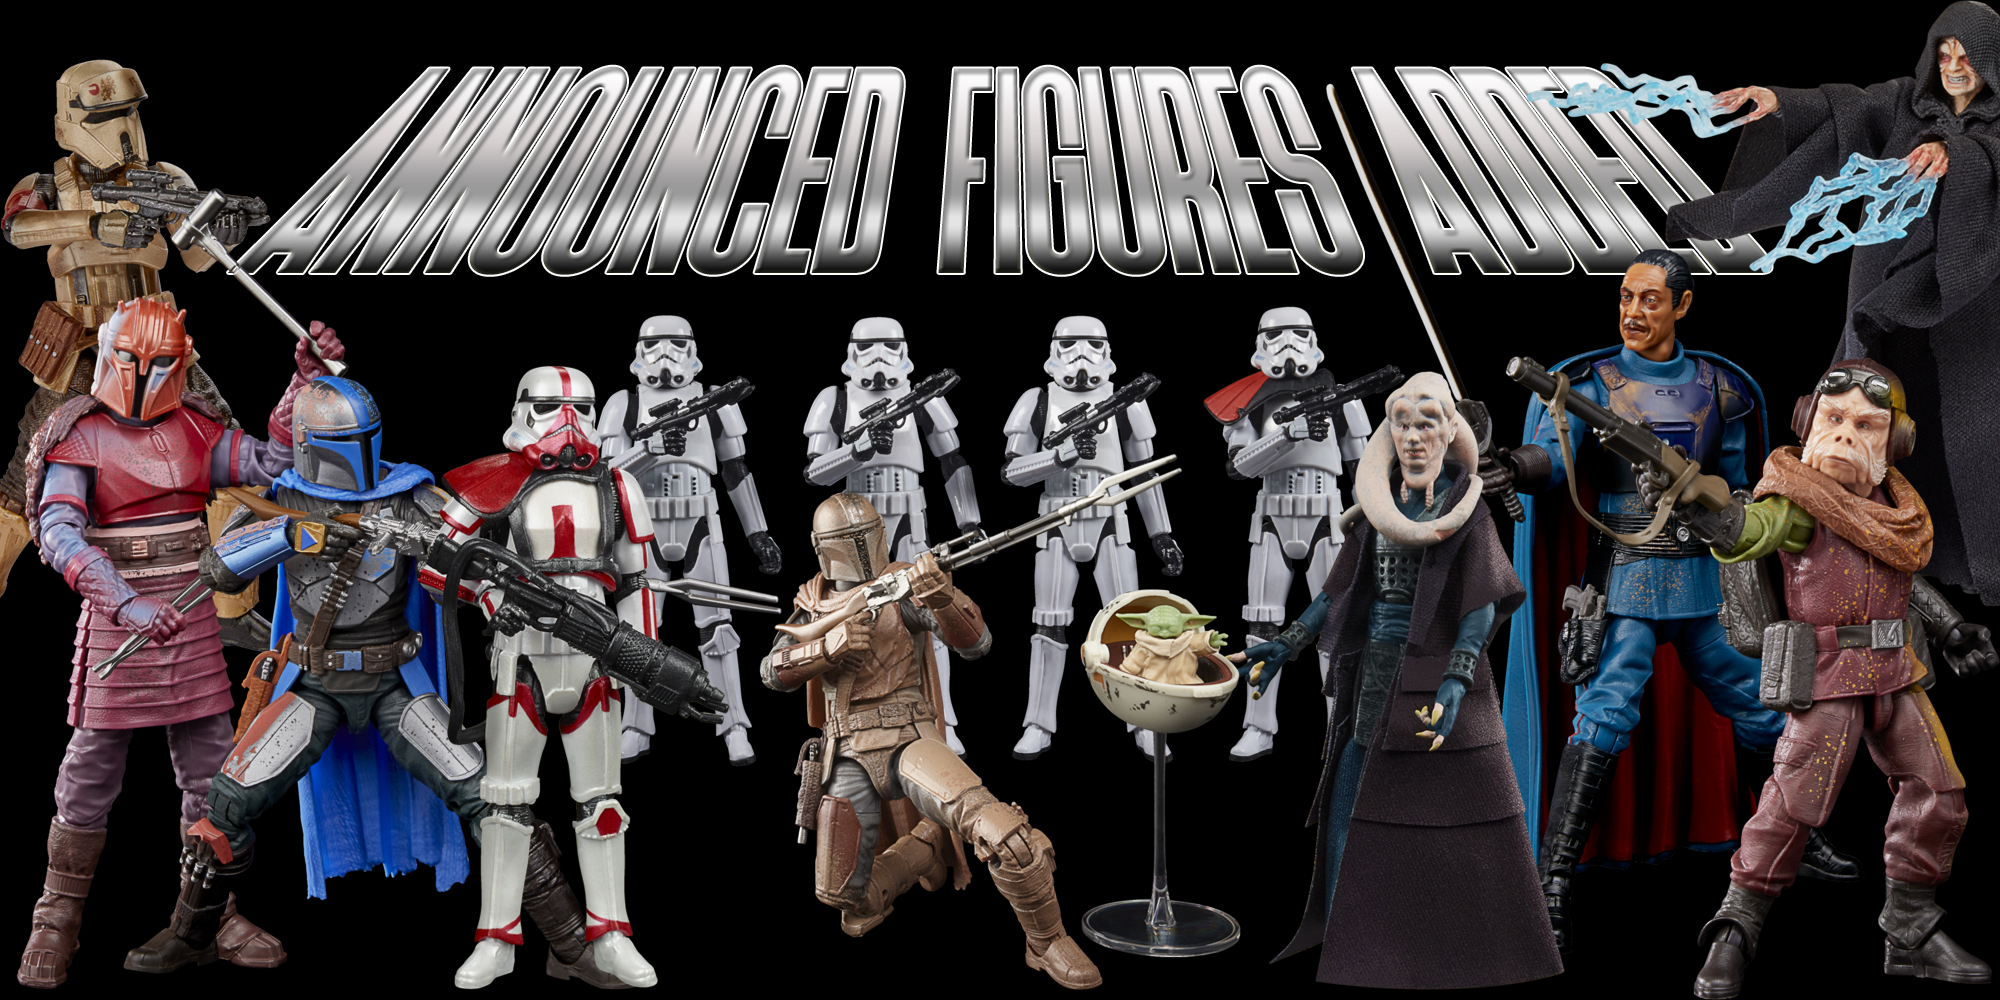 New Figures Added